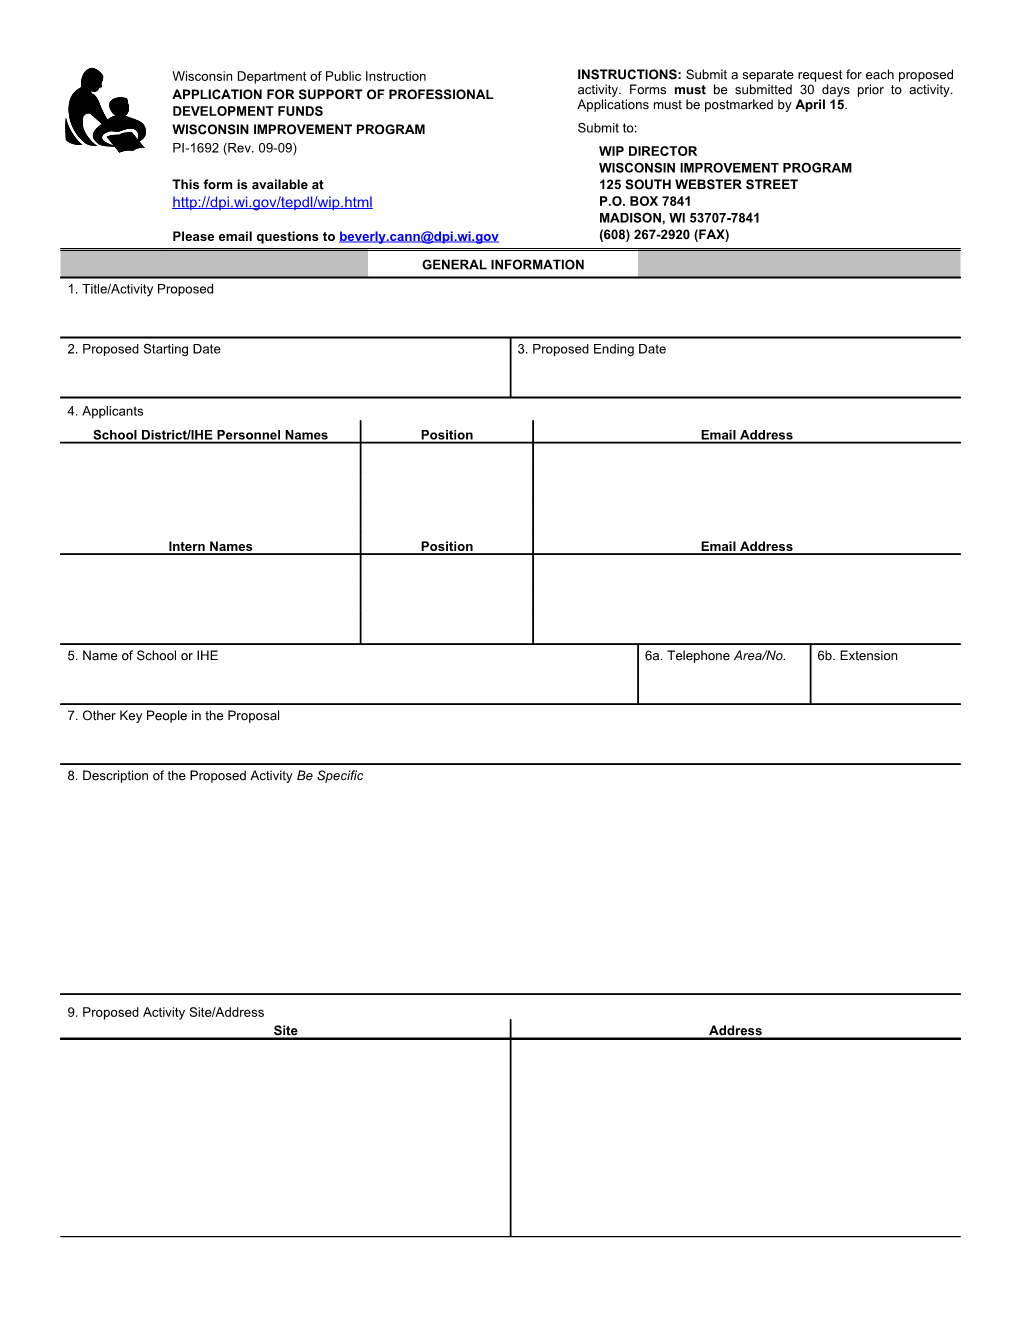 PI-1692 Application for Support of Professional Development Funds Wisconsin Improvement Program